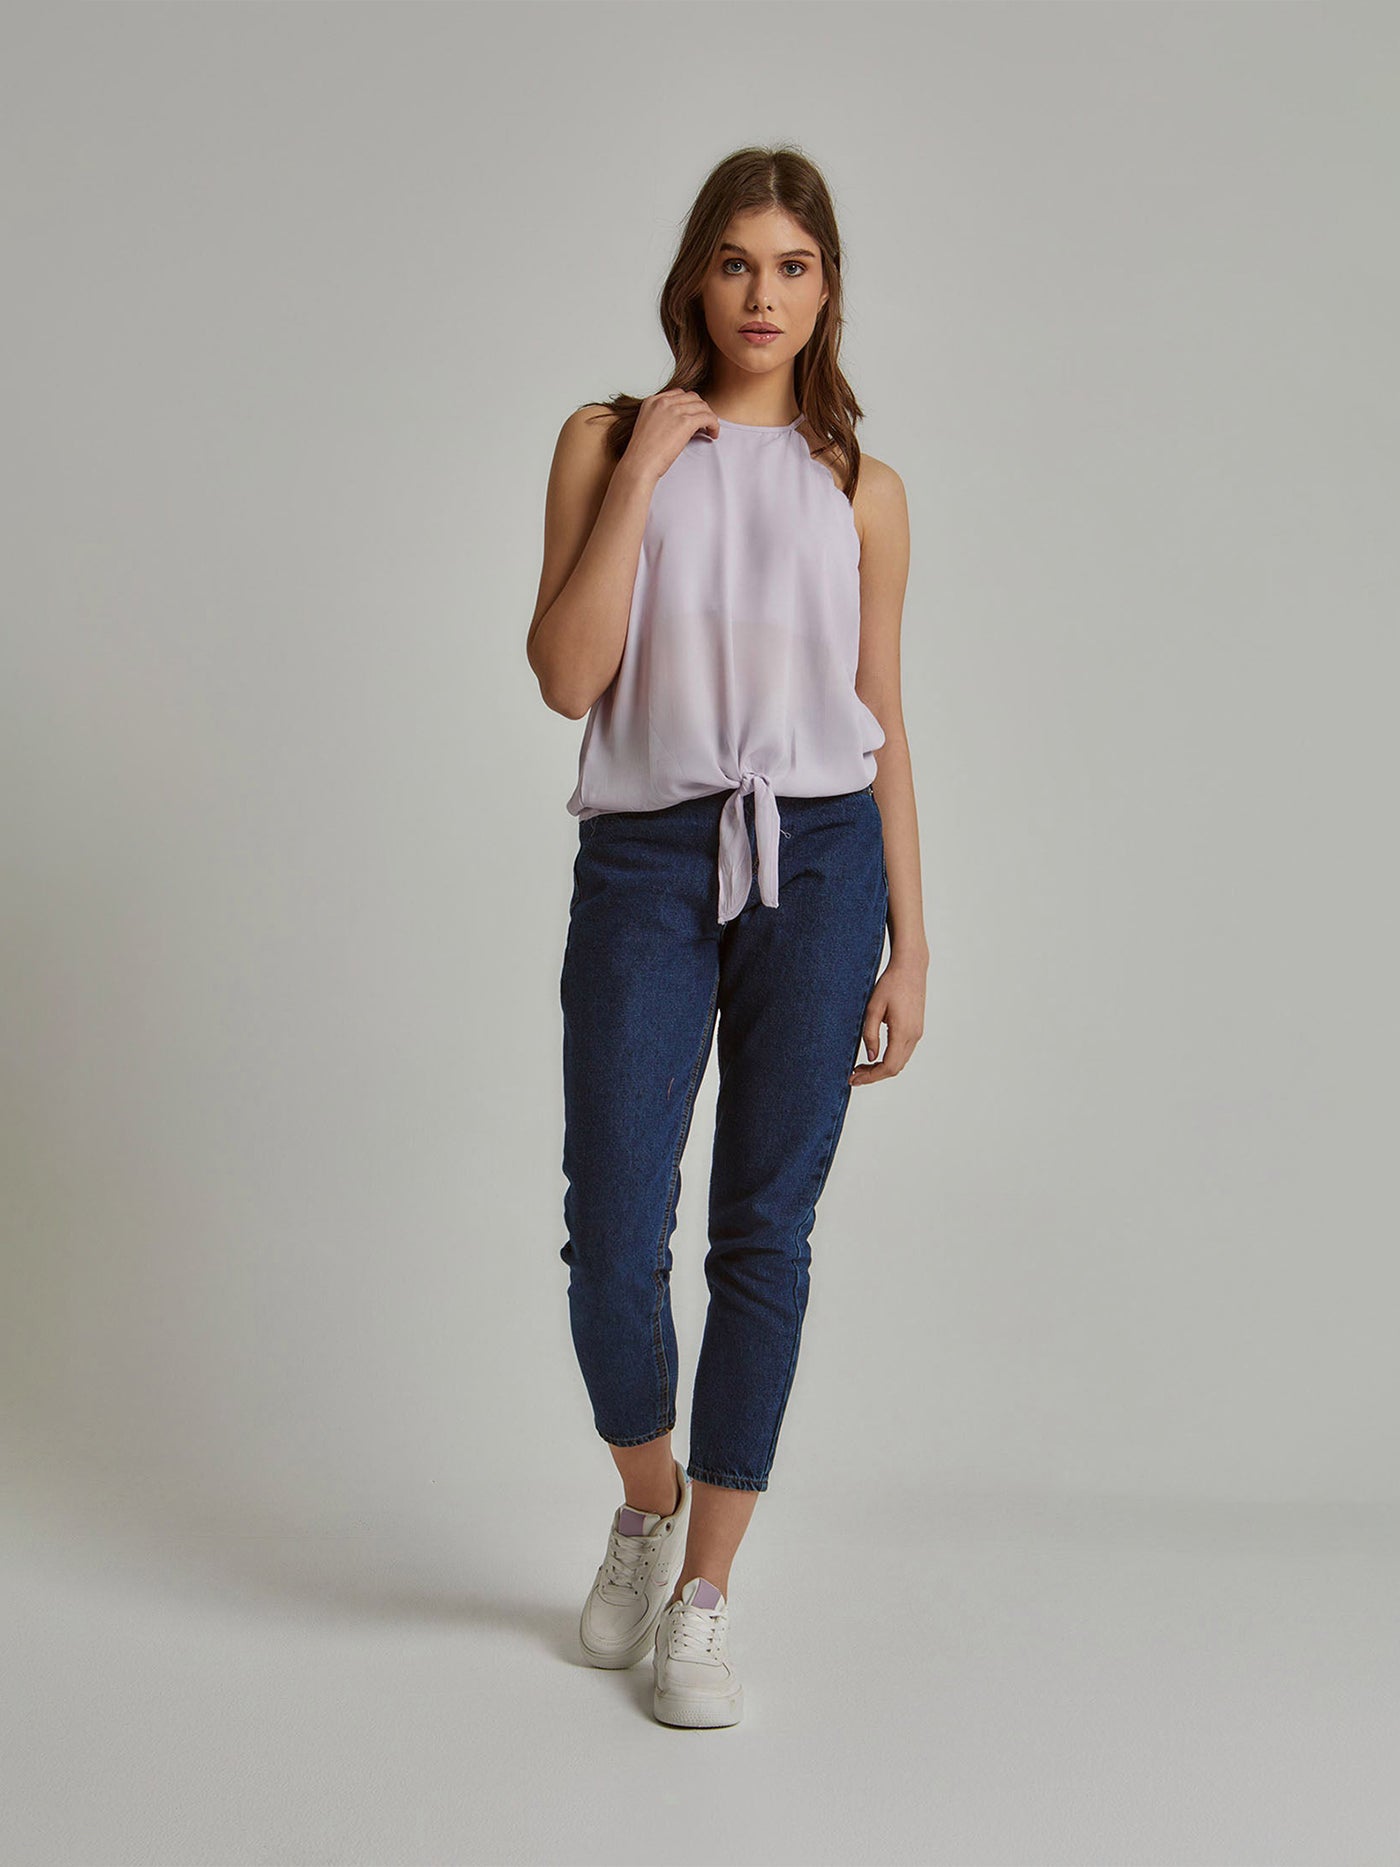 Top - With Lace - Trendy